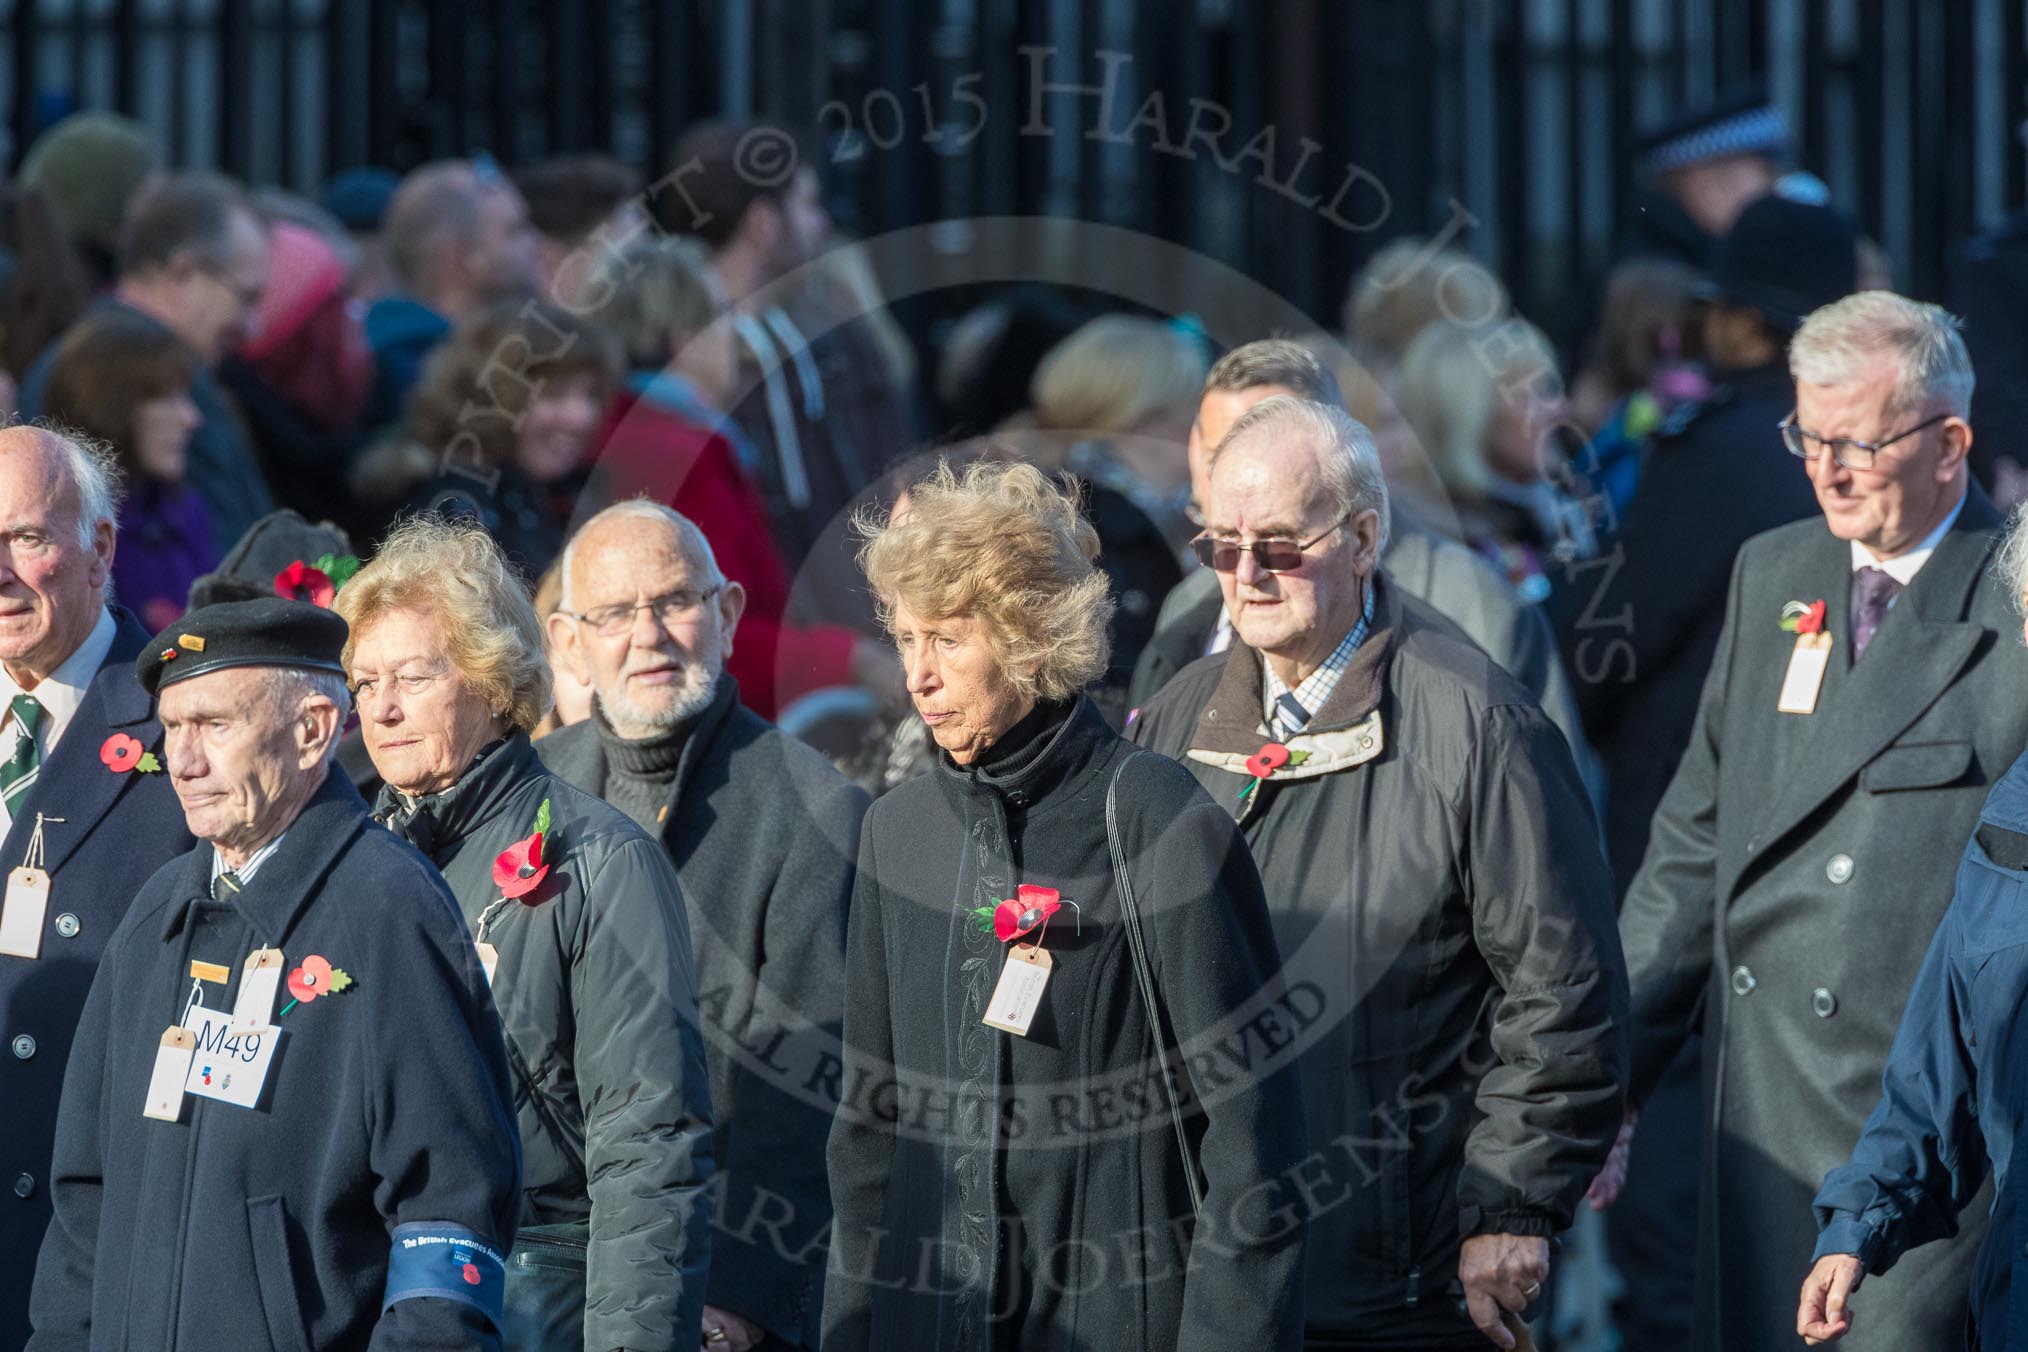 March Past, Remembrance Sunday at the Cenotaph 2016: M49 The British Evacuees Association.
Cenotaph, Whitehall, London SW1,
London,
Greater London,
United Kingdom,
on 13 November 2016 at 13:20, image #3023